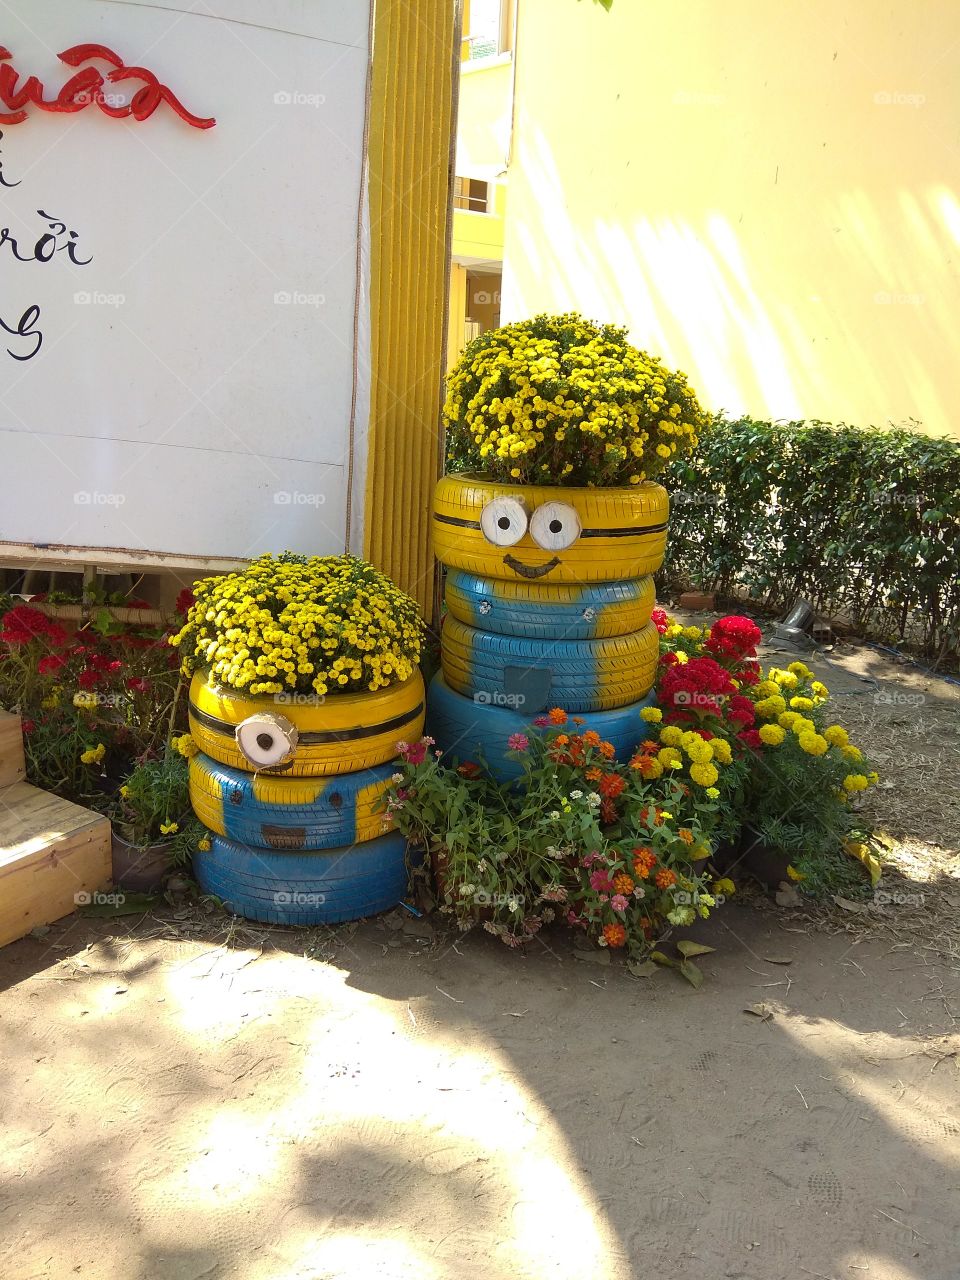 Minions Flower Pot - DIY Minion Planting Pot - Minions Recycle Project for Creative Kids and Childen - DIY Minions Crafts for Kids Projects